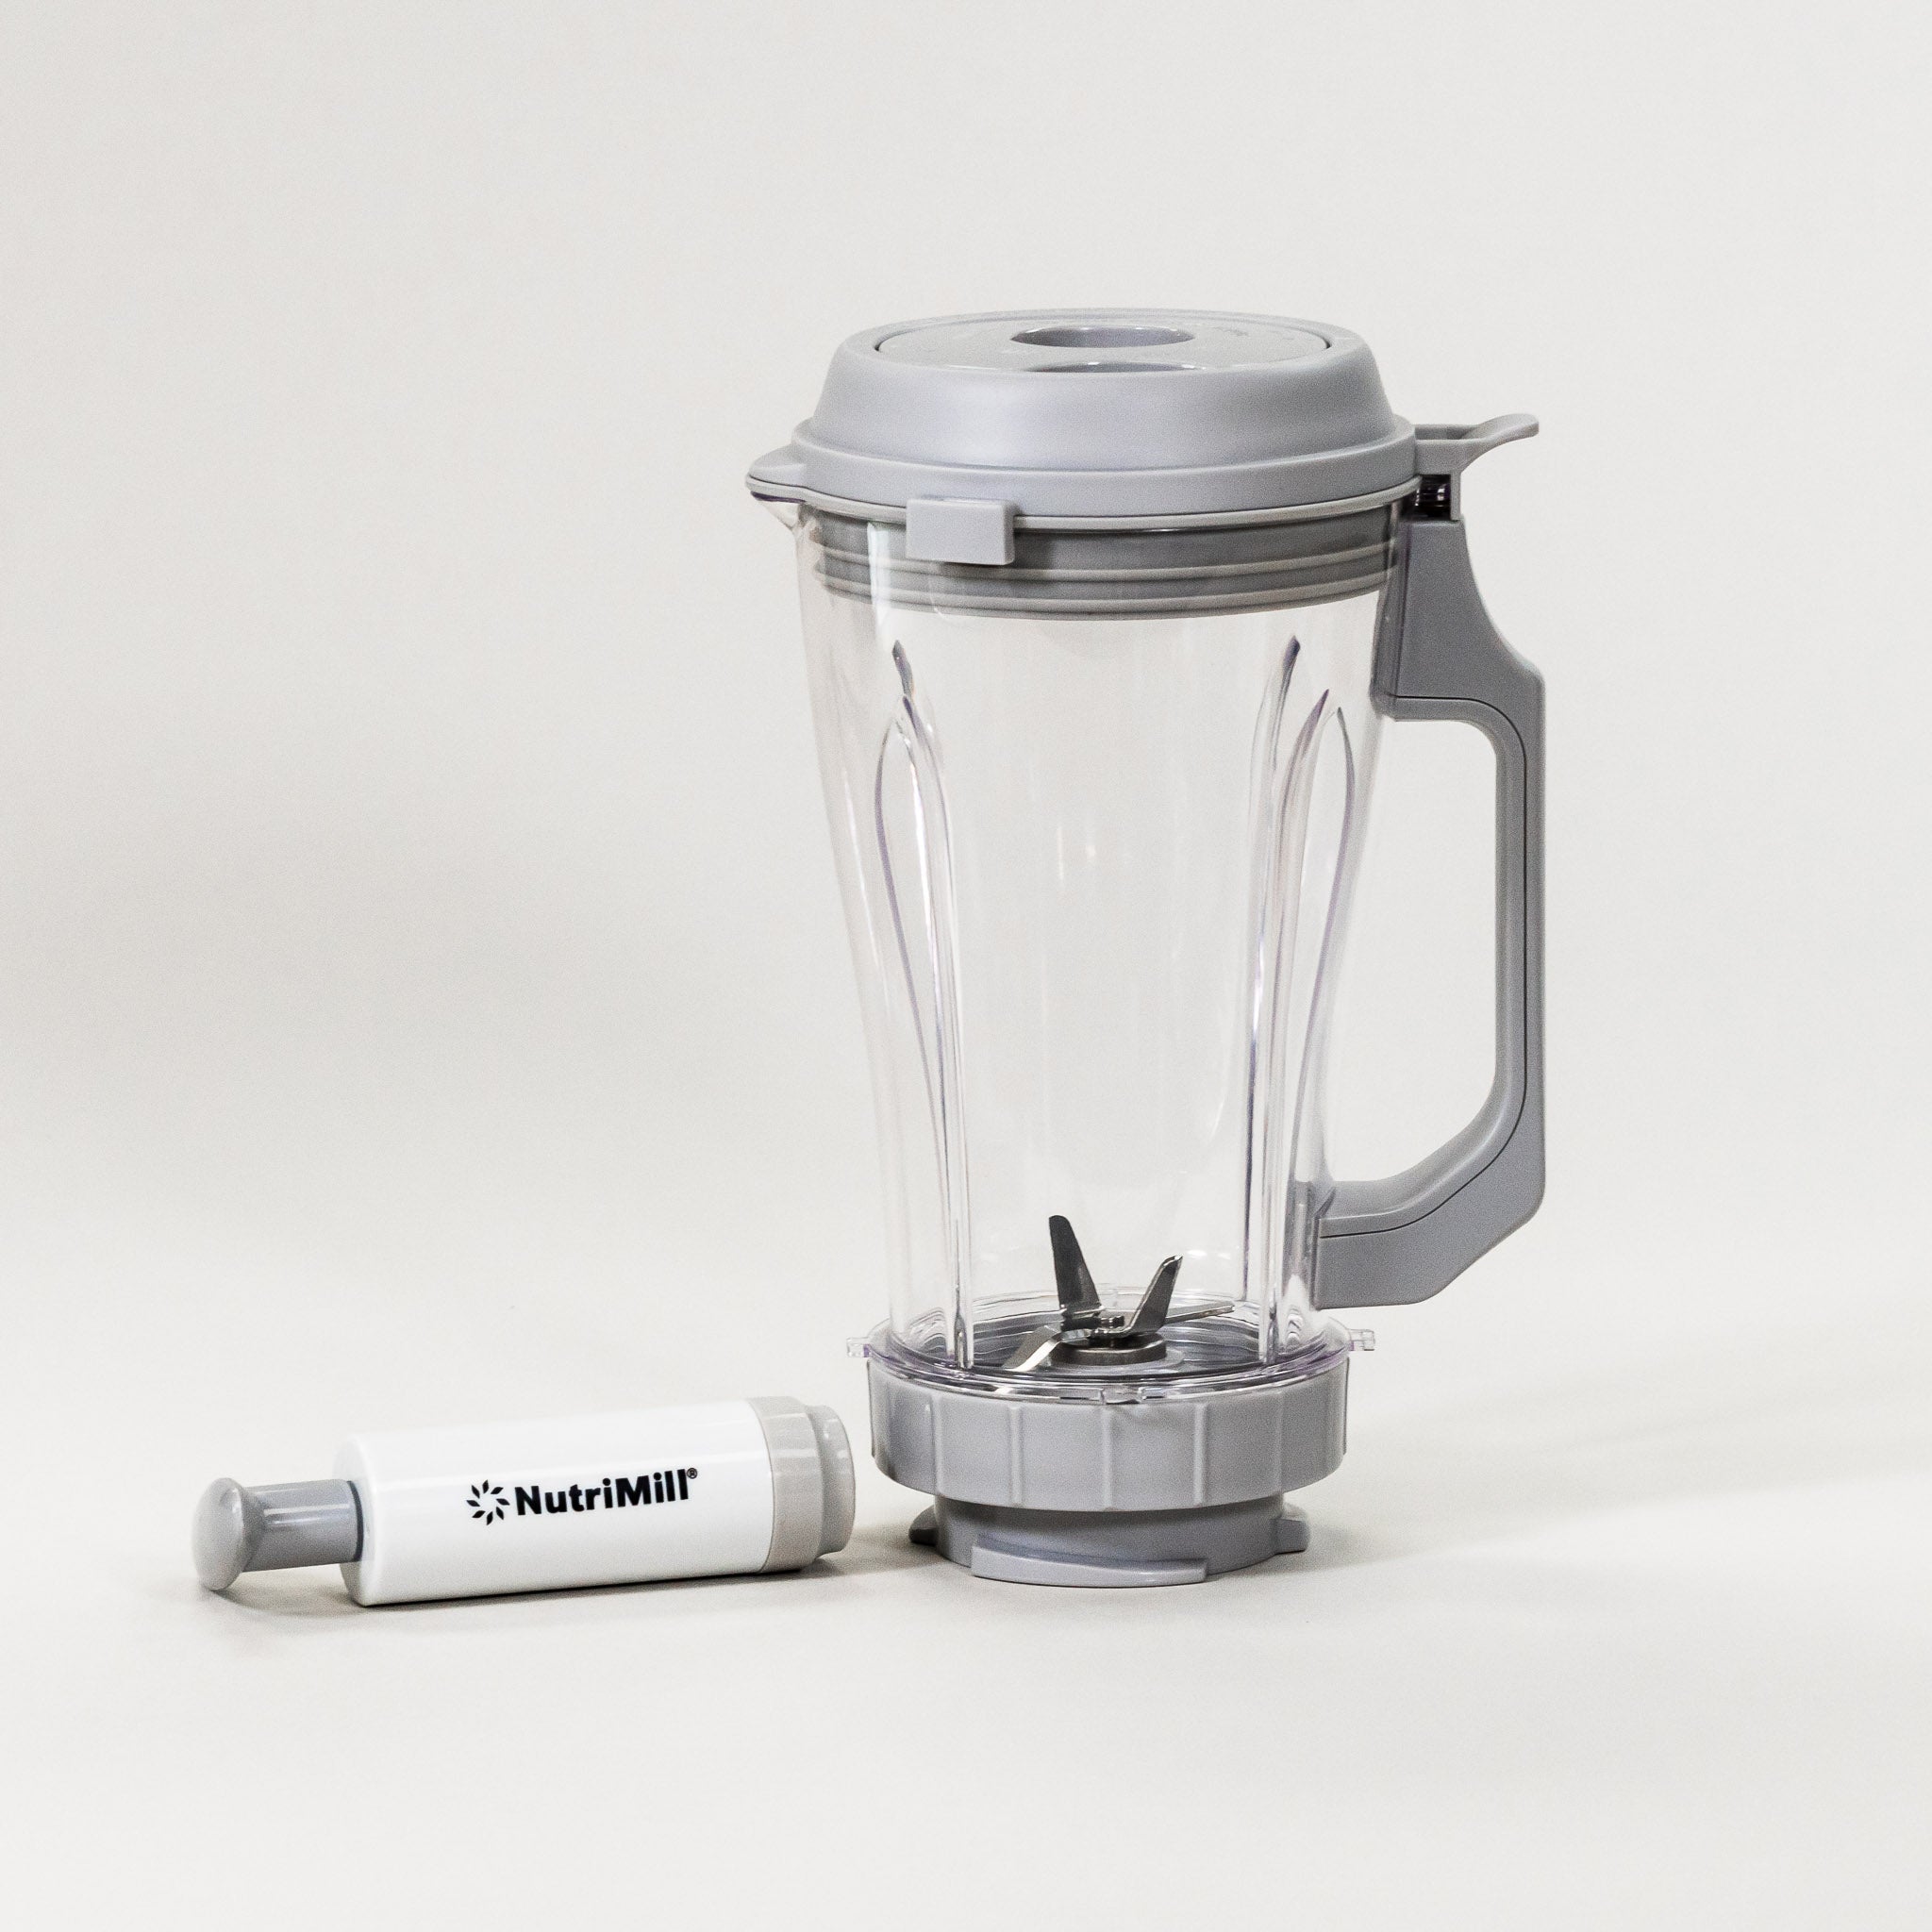 How to Use your Bosch Universal Plus Blender 